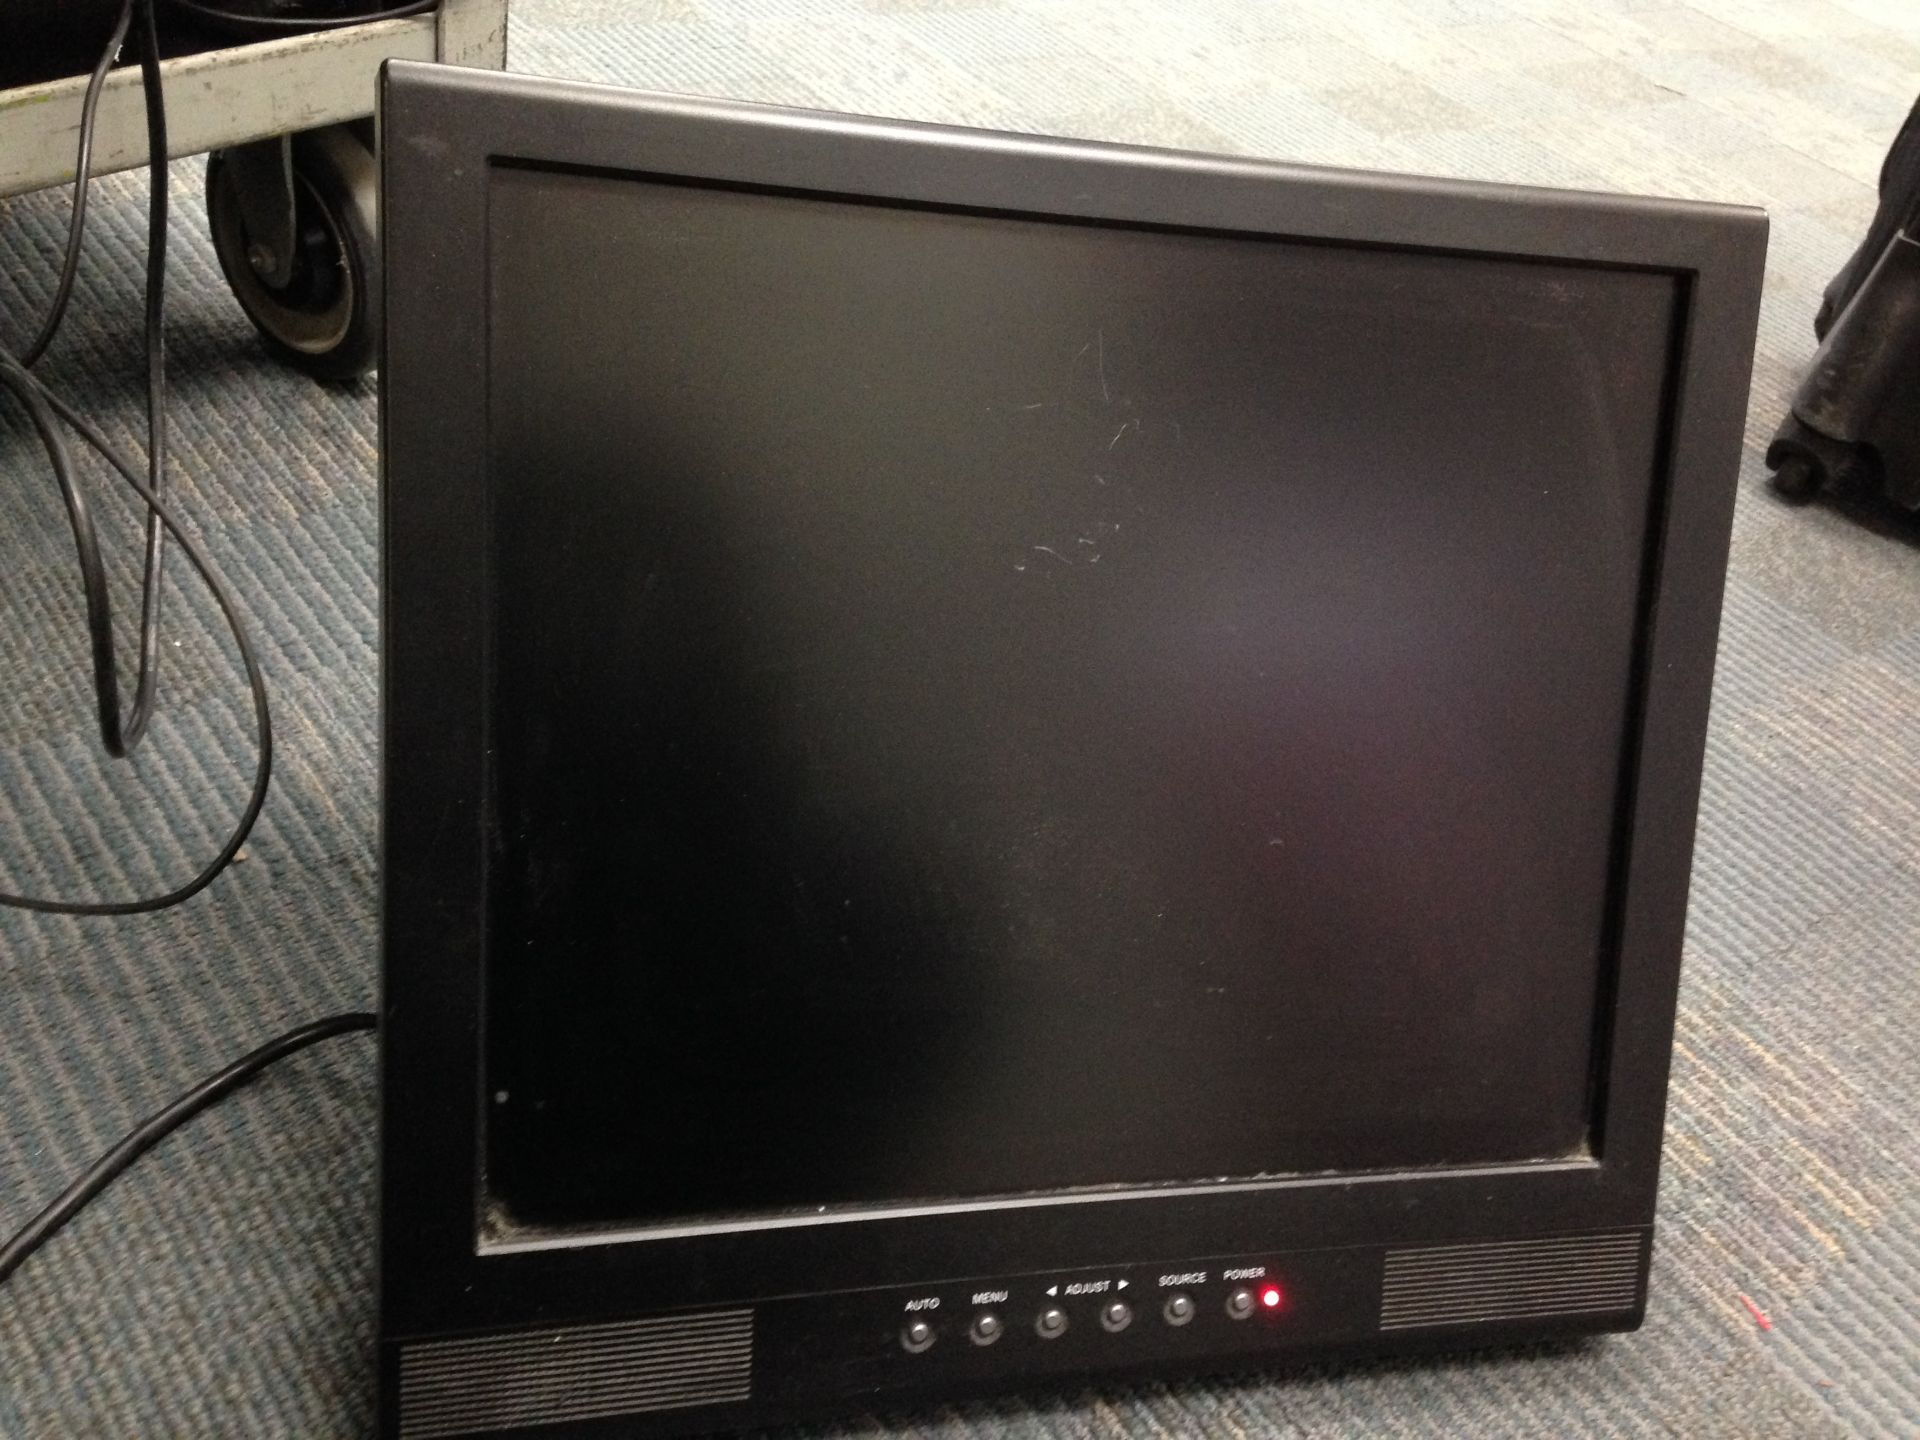 MONITOR FOR VIDEO SURVEILLANCE